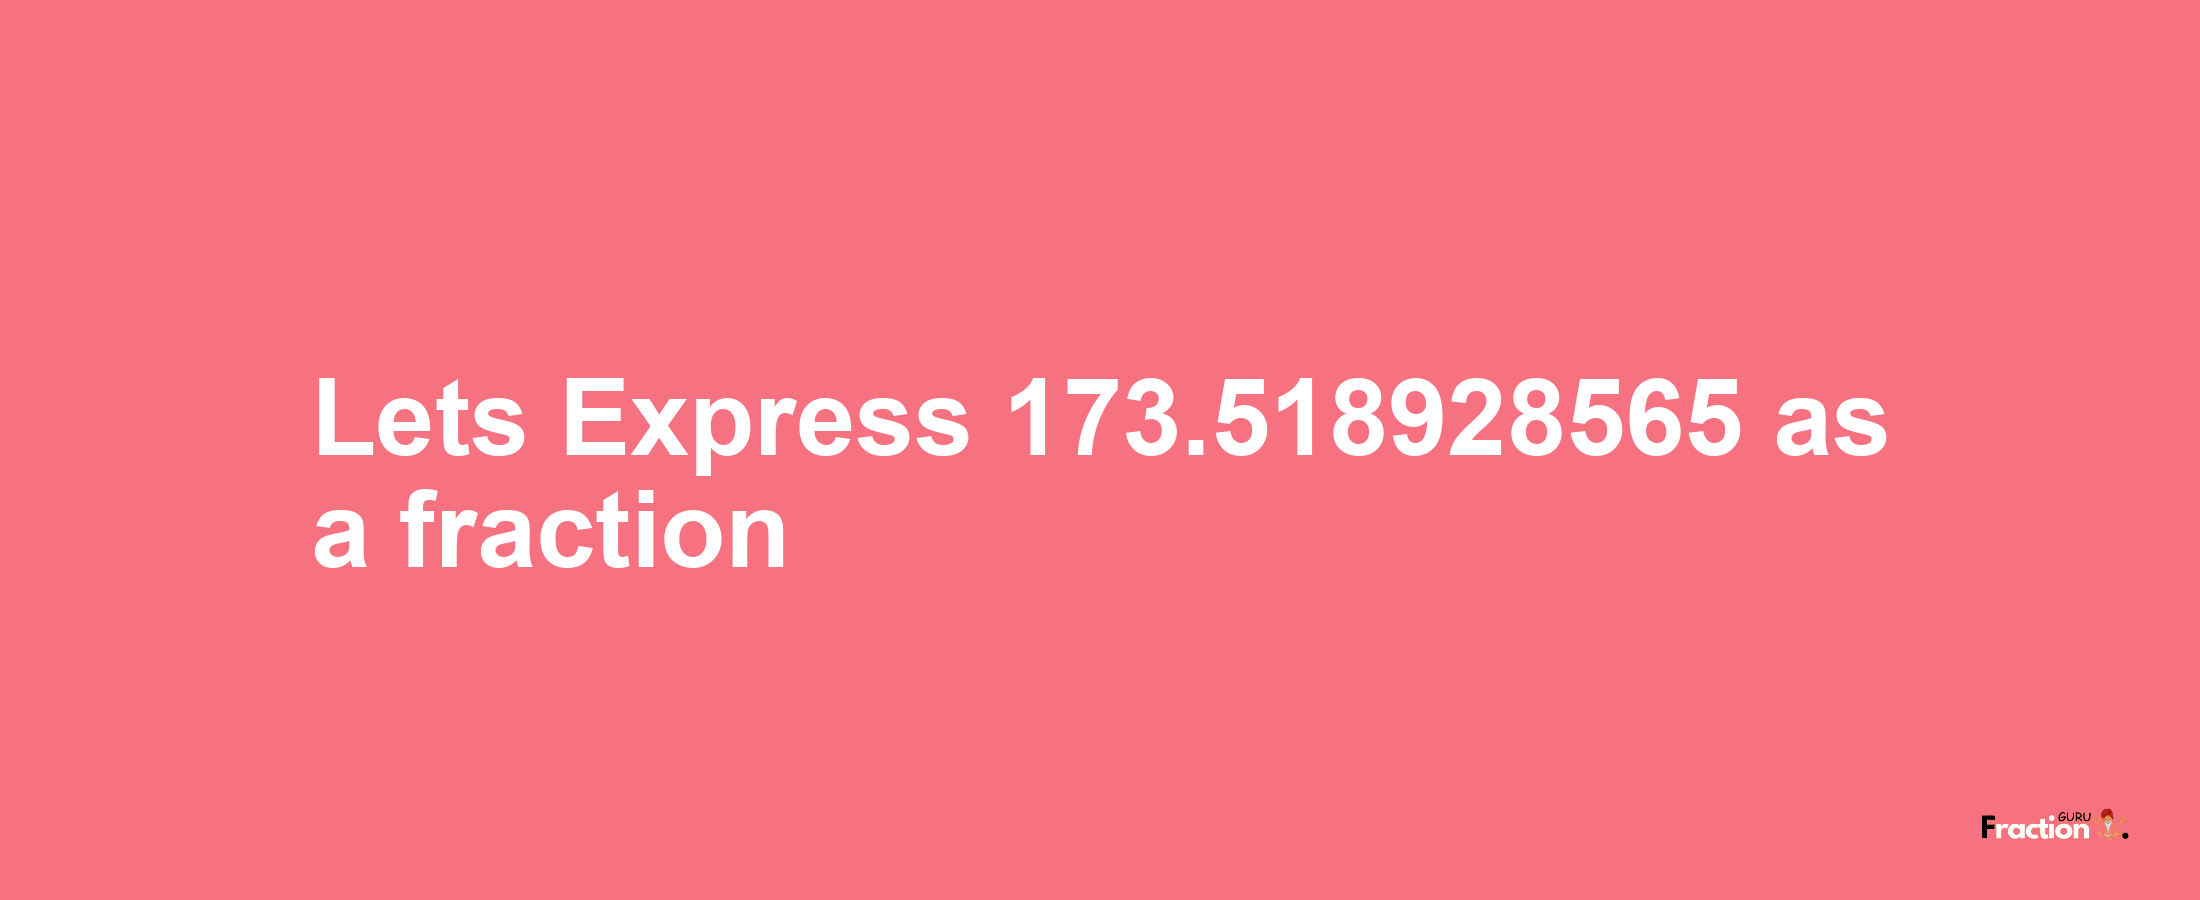 Lets Express 173.518928565 as afraction